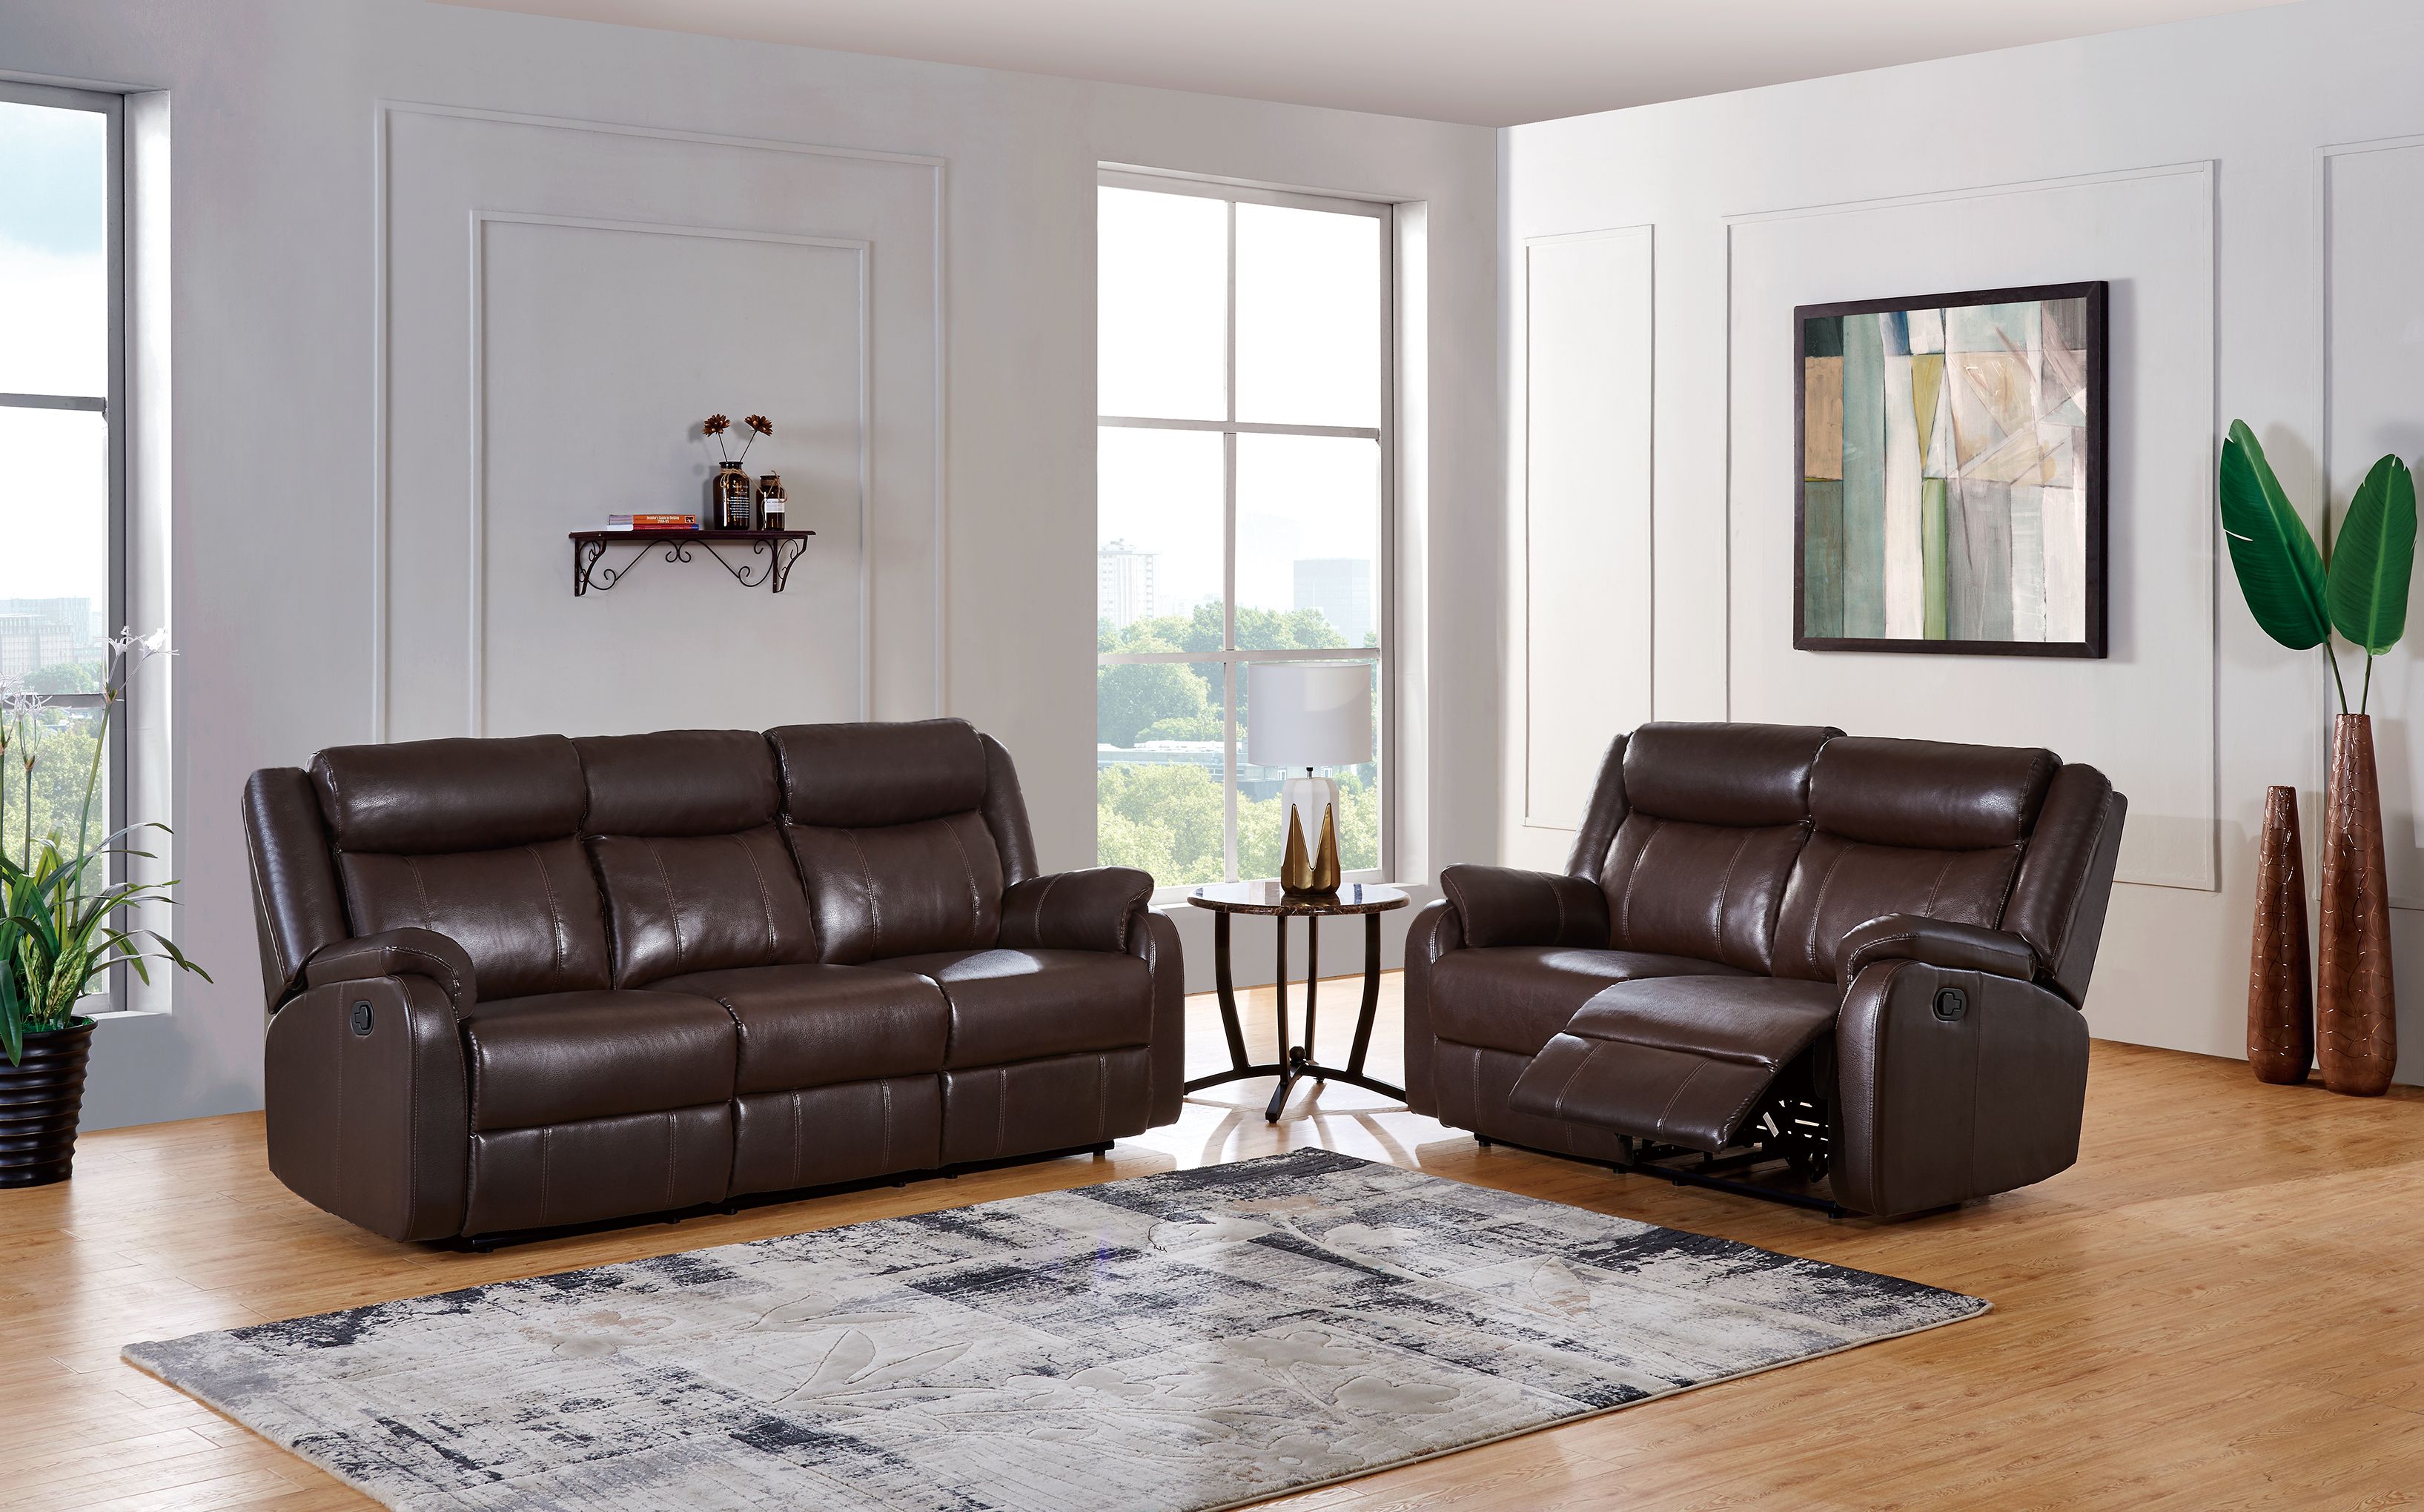 Drawer Reclining Sofa in Brown - image 10 of 10